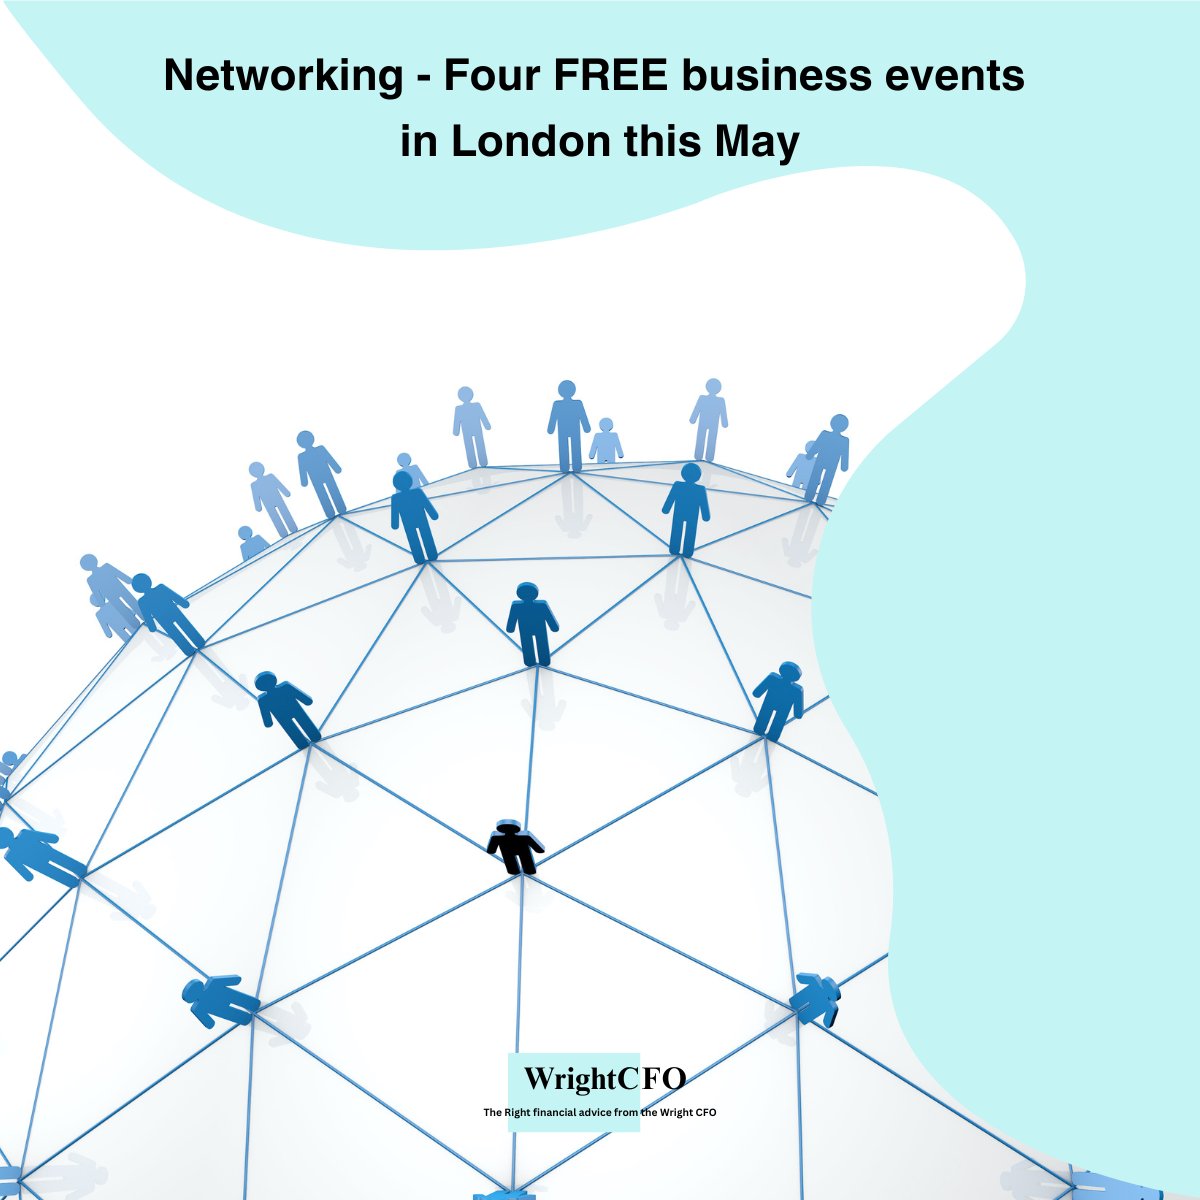 Four FREE business events in London this May - a great opportunity for networking and marketing. startups.co.uk/news/free-busi…